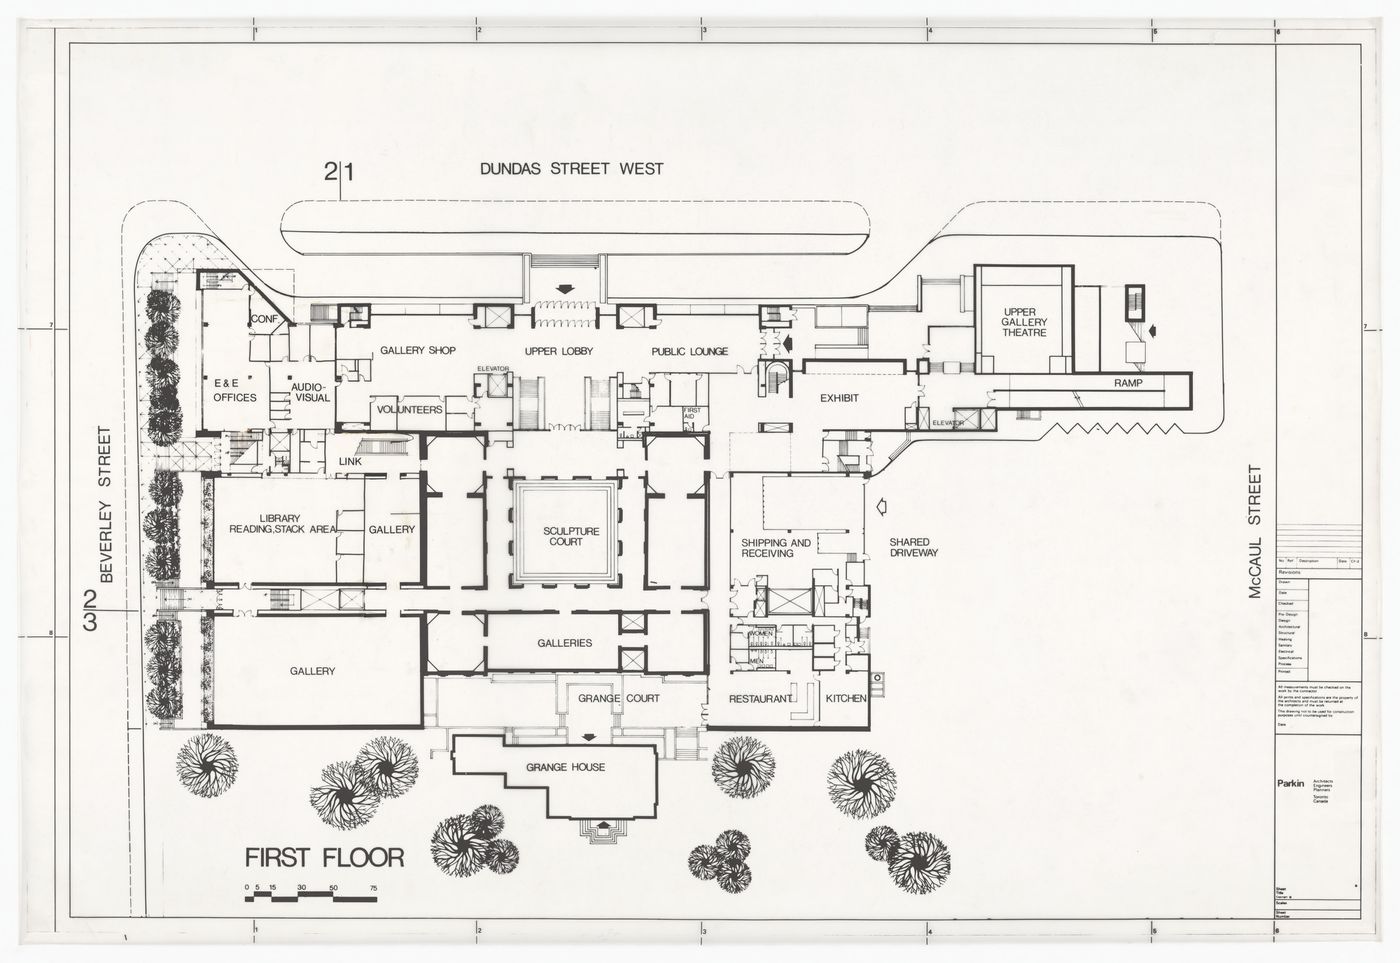 First floor plan for Art Gallery of Ontario, Stage II Expansion, Toronto